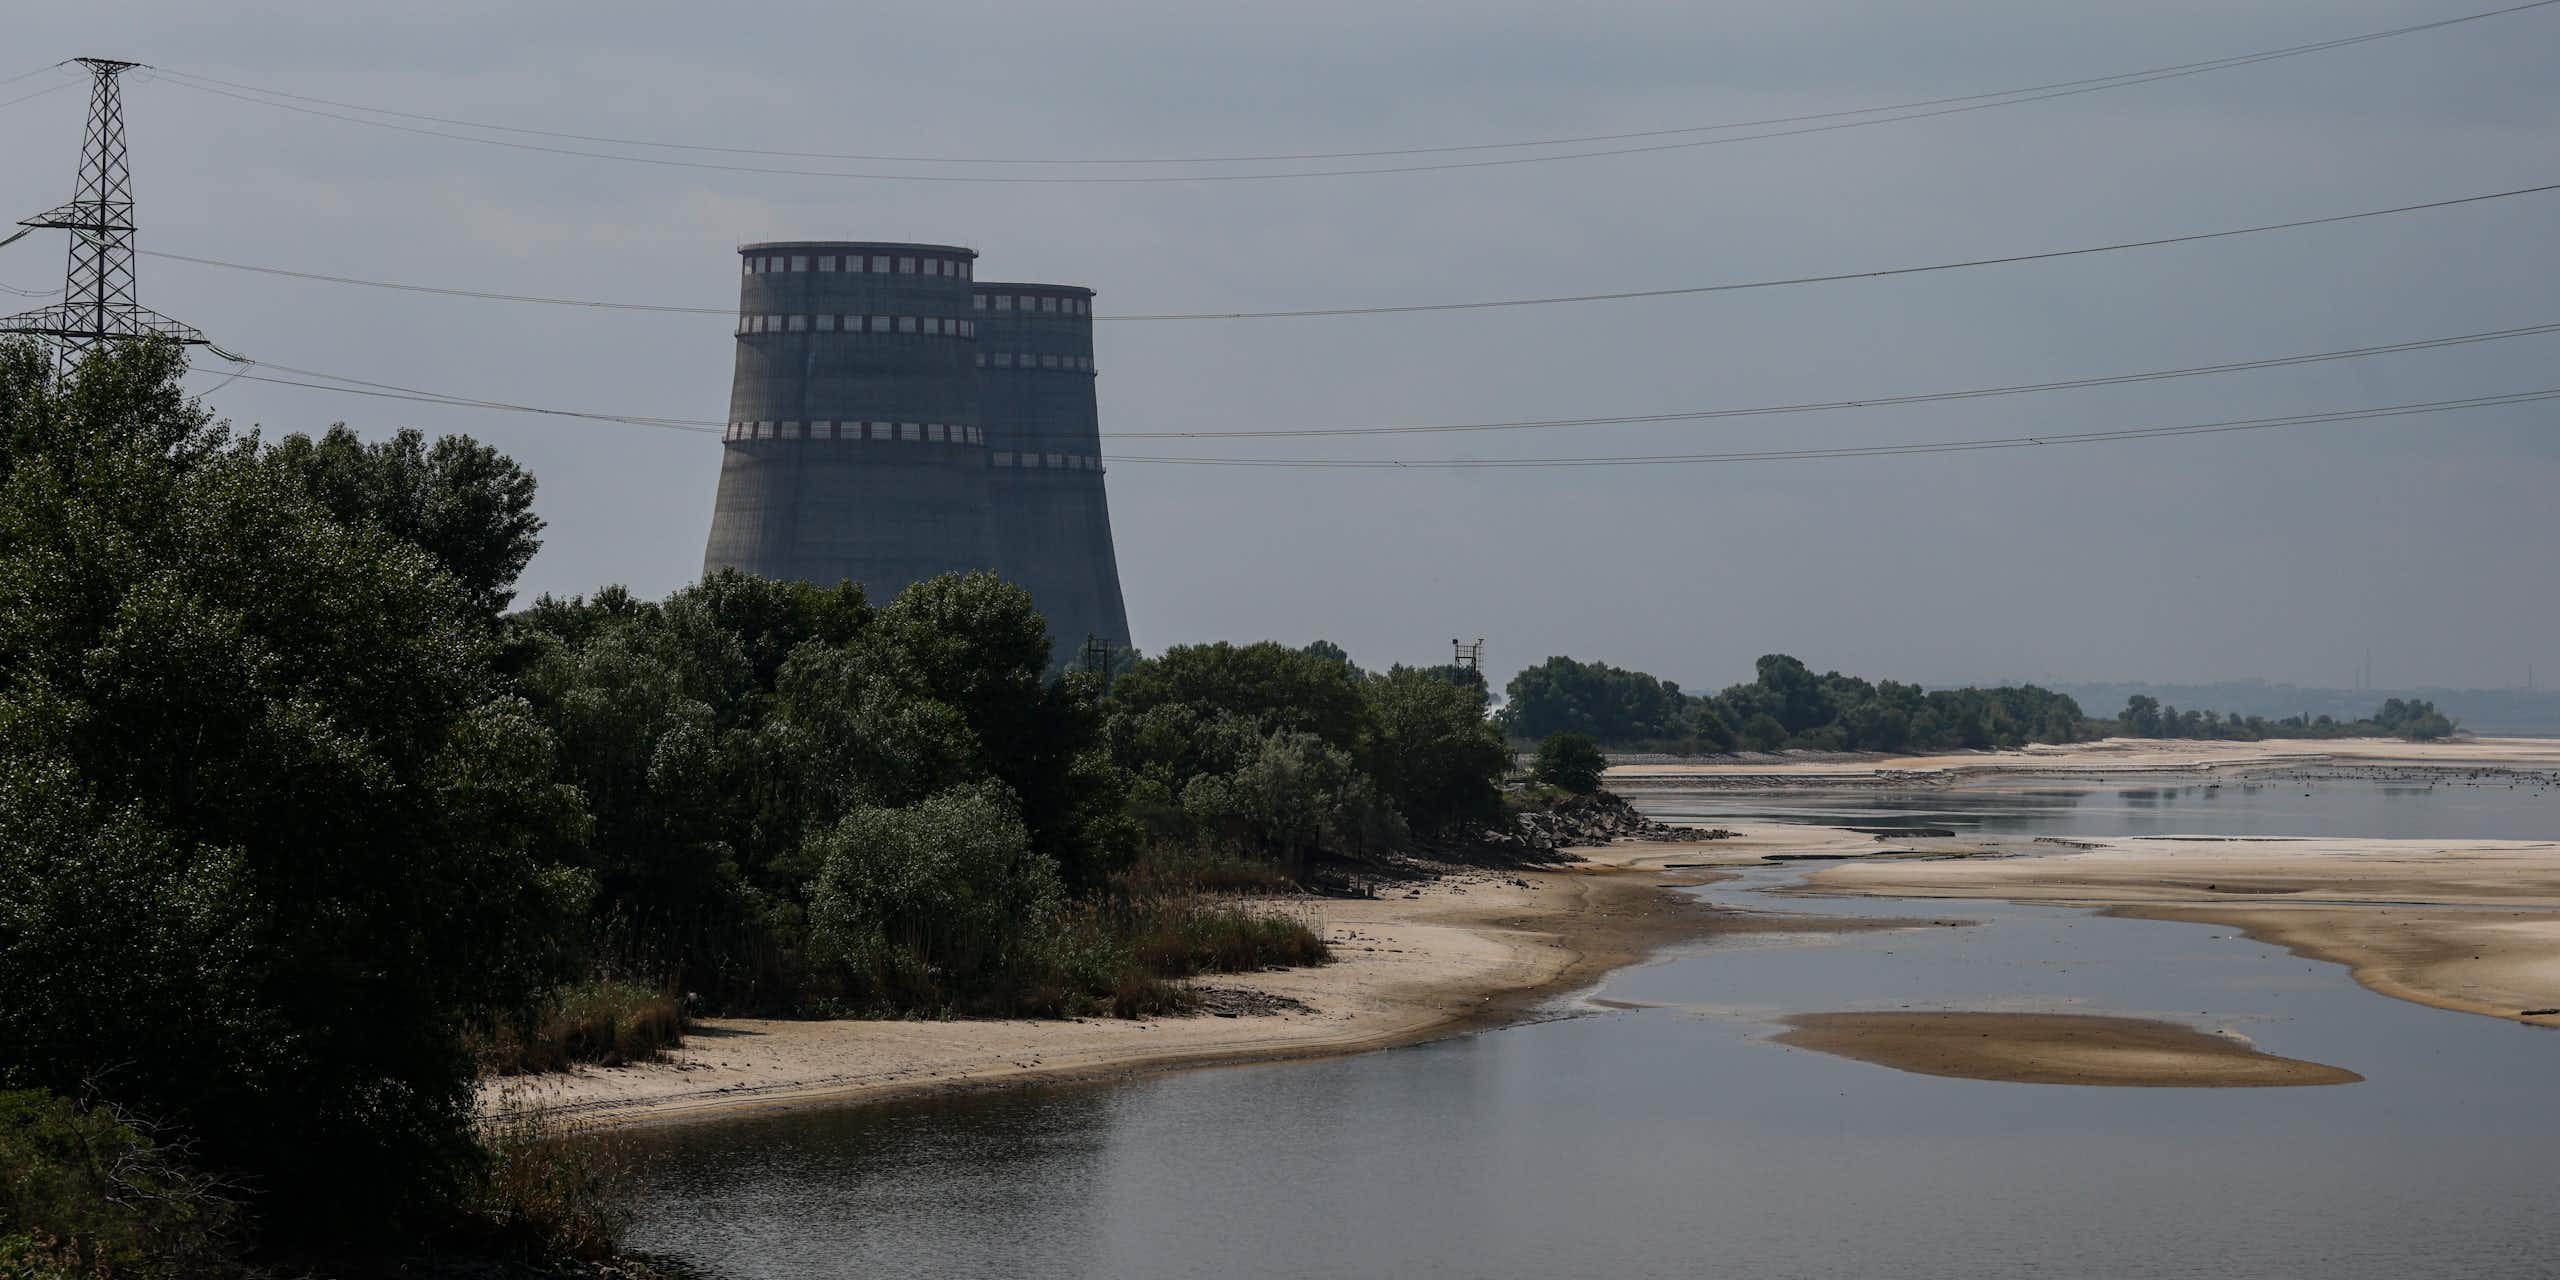 View of the cooling towers of the Zaporizhzhia Nuclear Power Plant, Ukraine